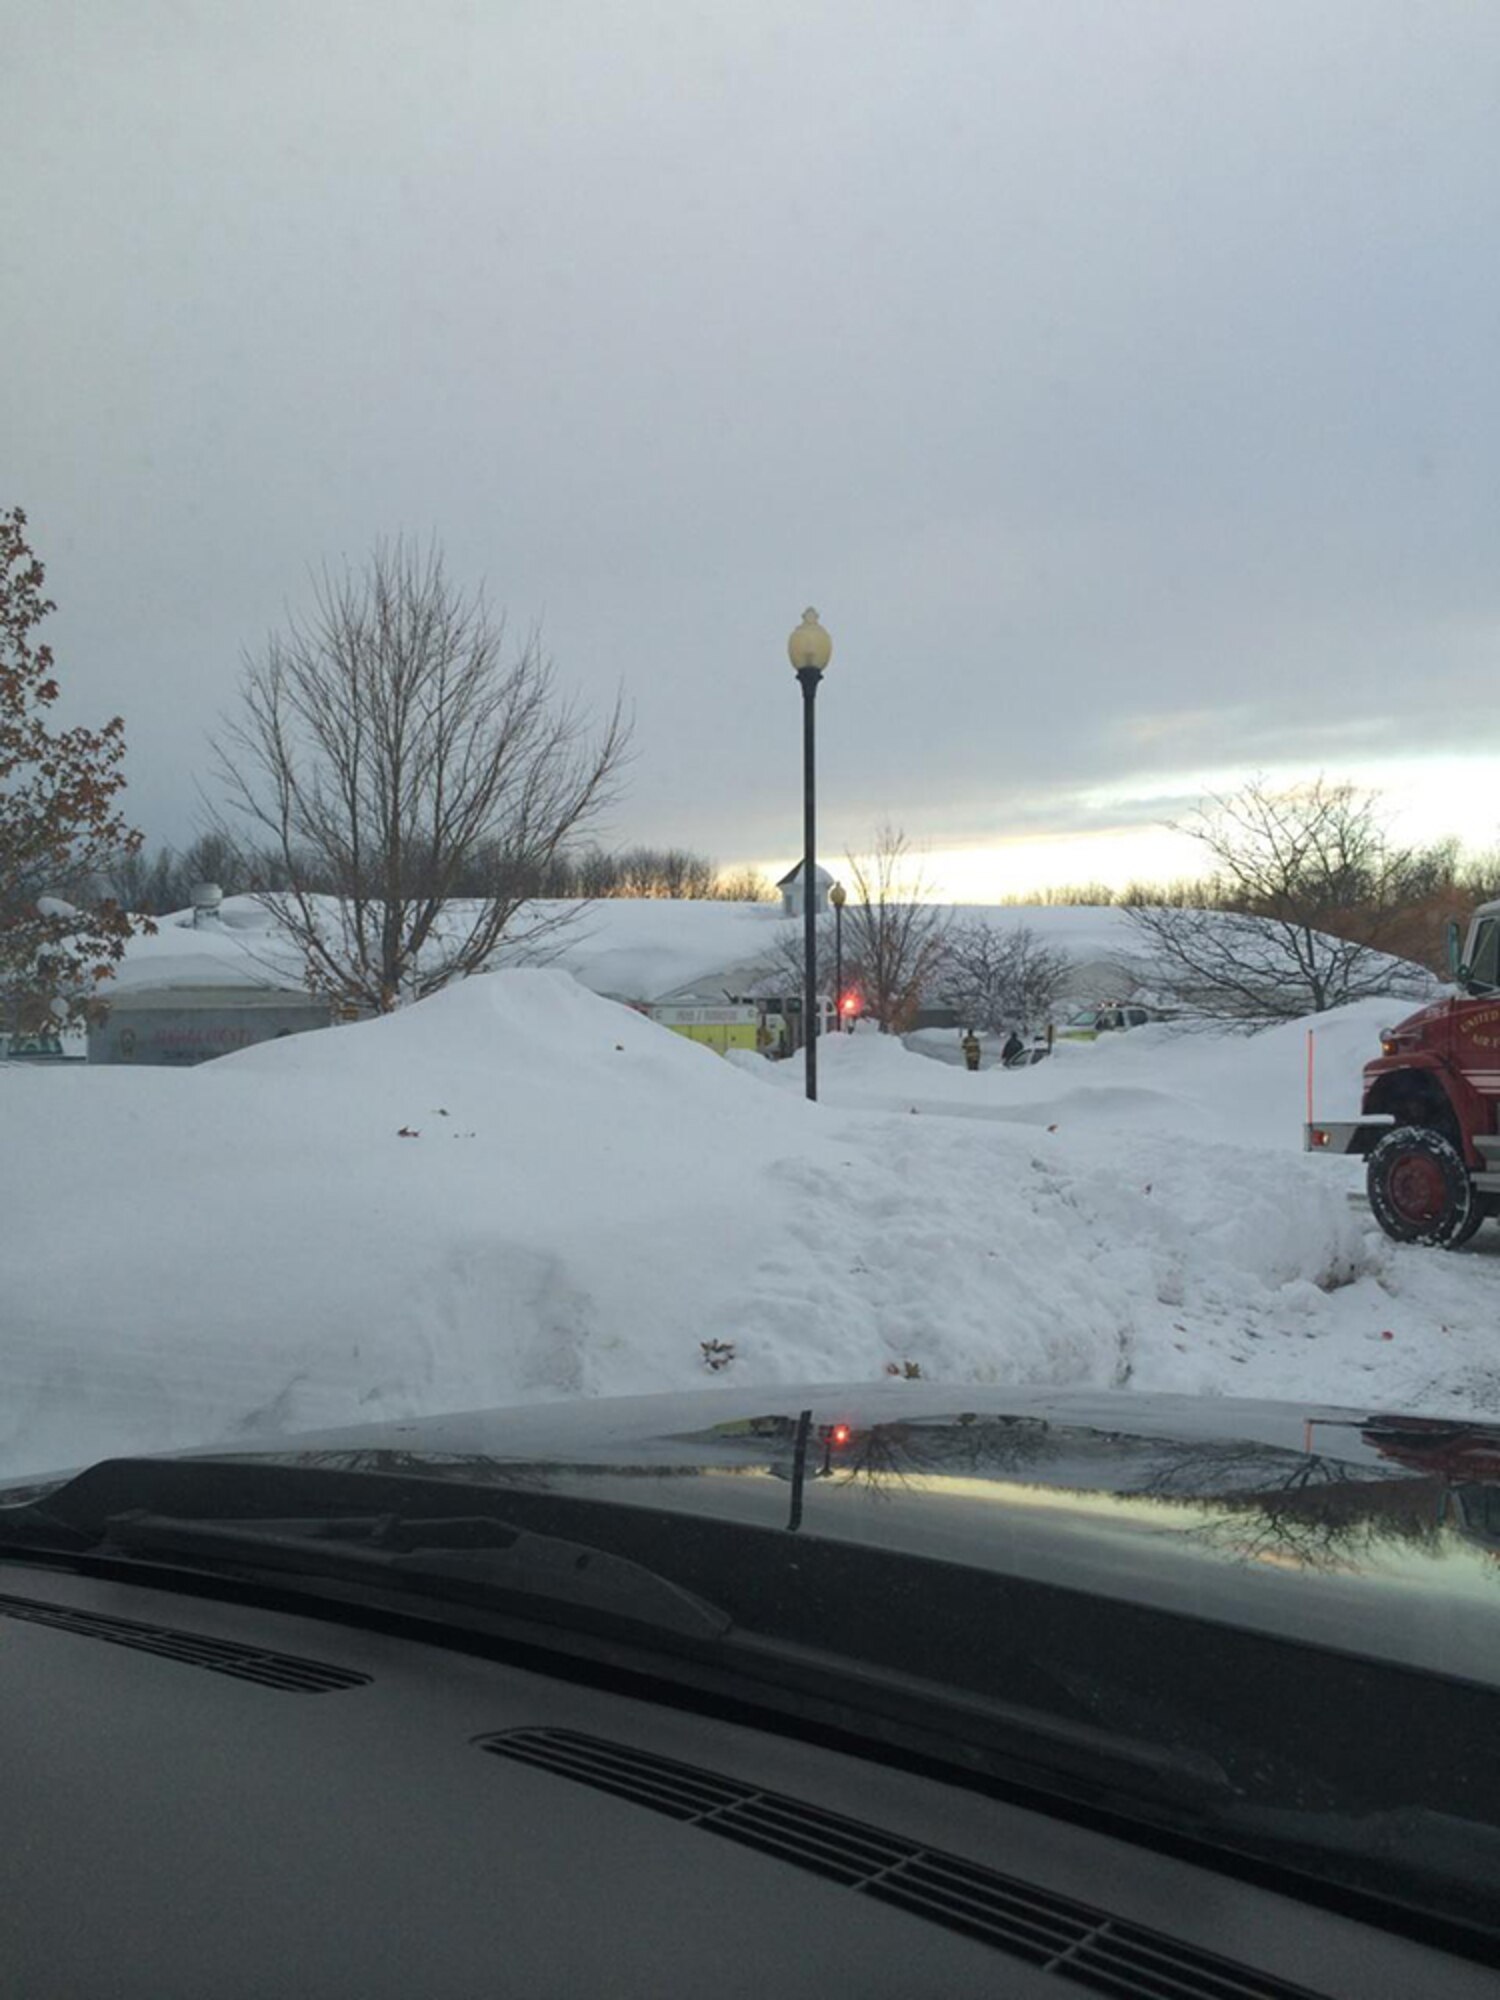 A mass amount of snow blankets an assisted living facility in the Buffalo area on November 20th, 2014. Niagara Falls Air Reserve Station Fire Emergency Services personnel responded to assist civilian responders during an epic lake effect snow storm that paralyzed the area. (U.S. Air Force Photo by Deputy Fire Chief Arron McLane)